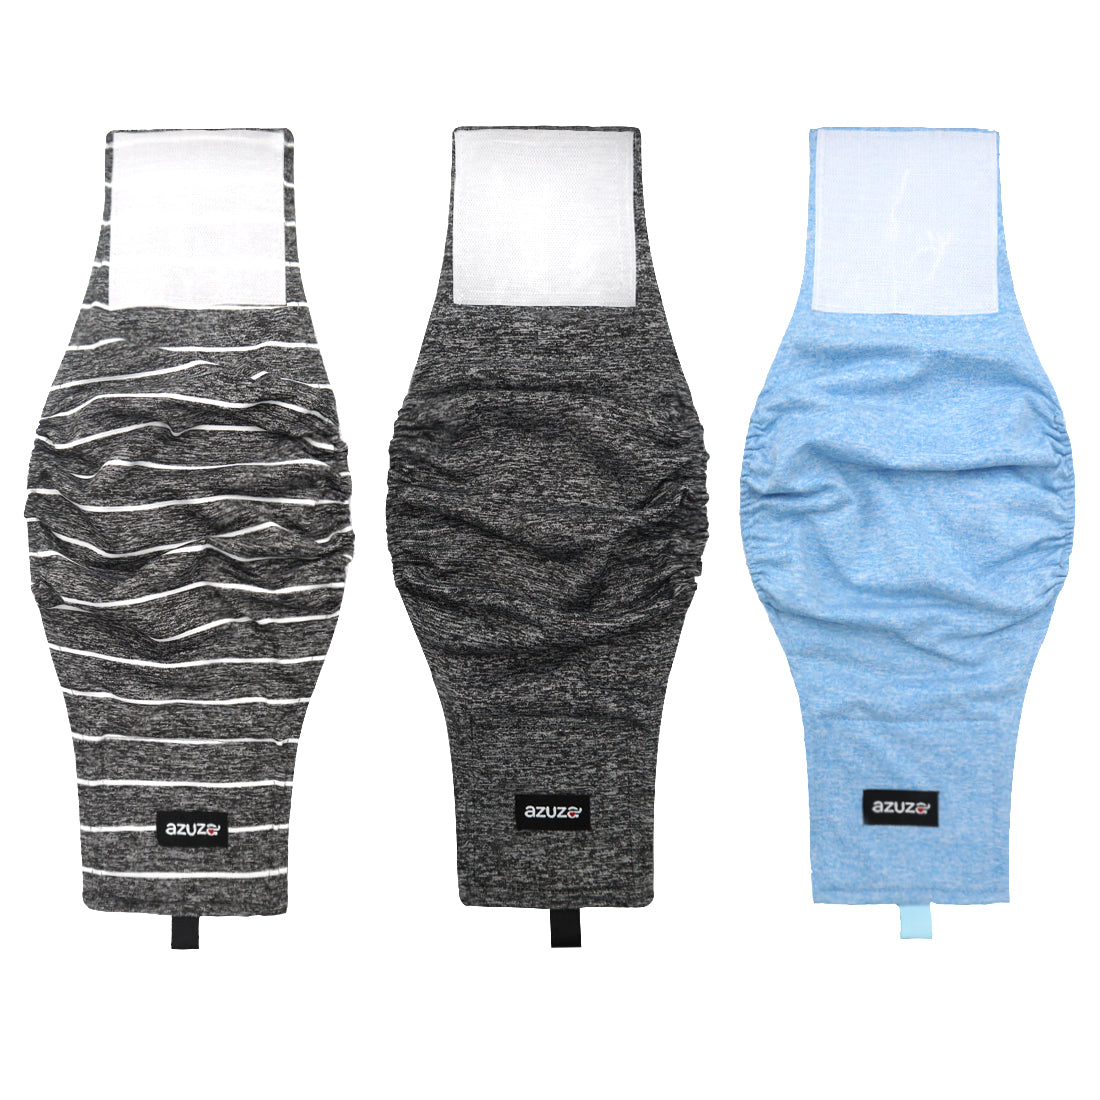 KYEESE 3 Pack Sports Fashion Male Dog Diapers Washable Breathable Dog Wraps Belly Bands with Inside Pocket Great for Summer